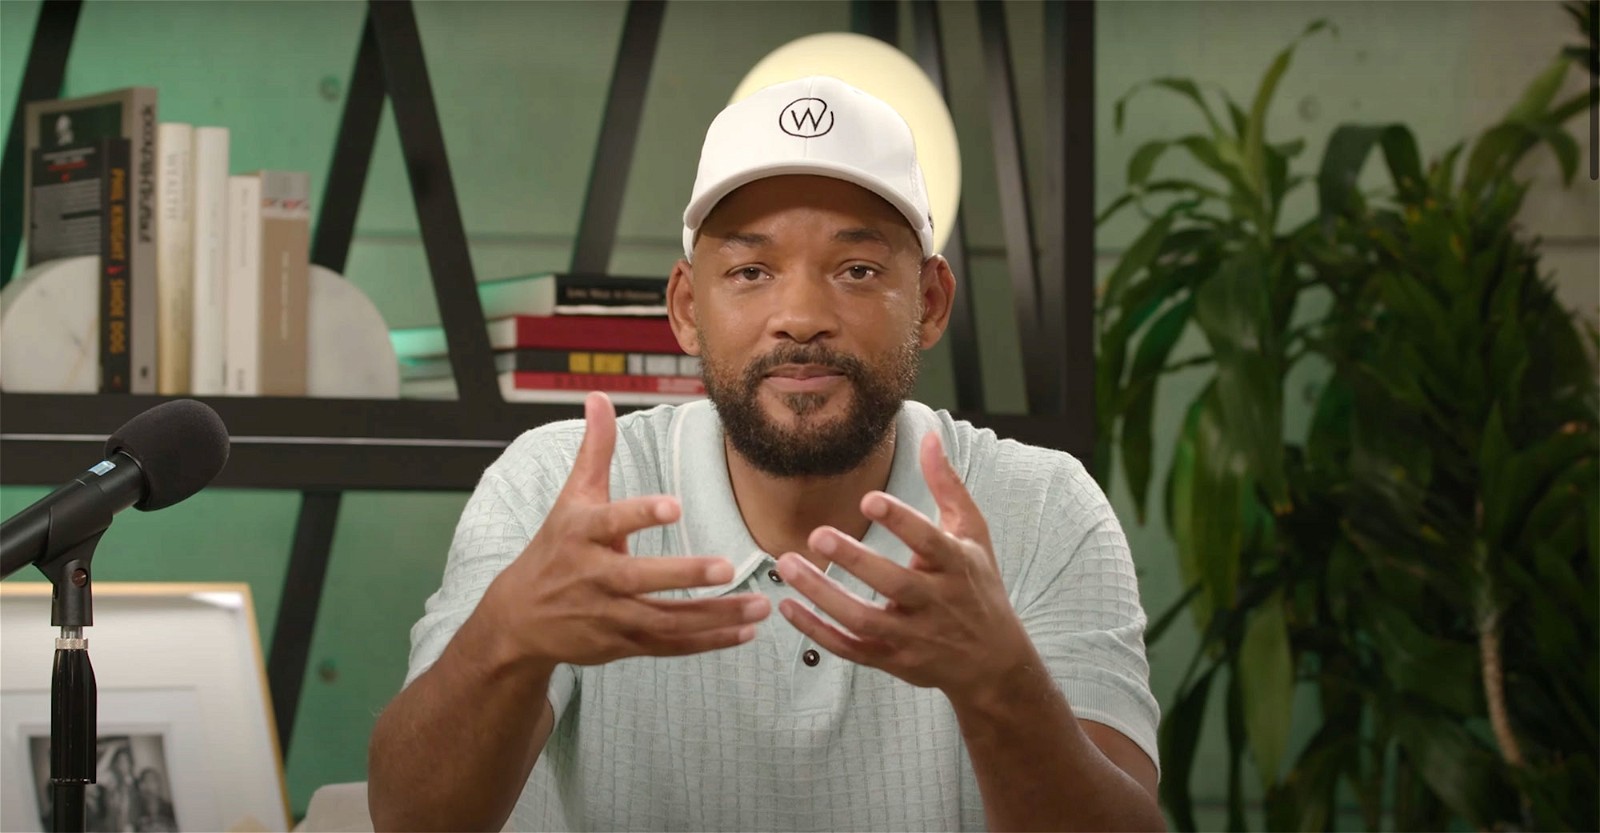 Will Smith in his apology video